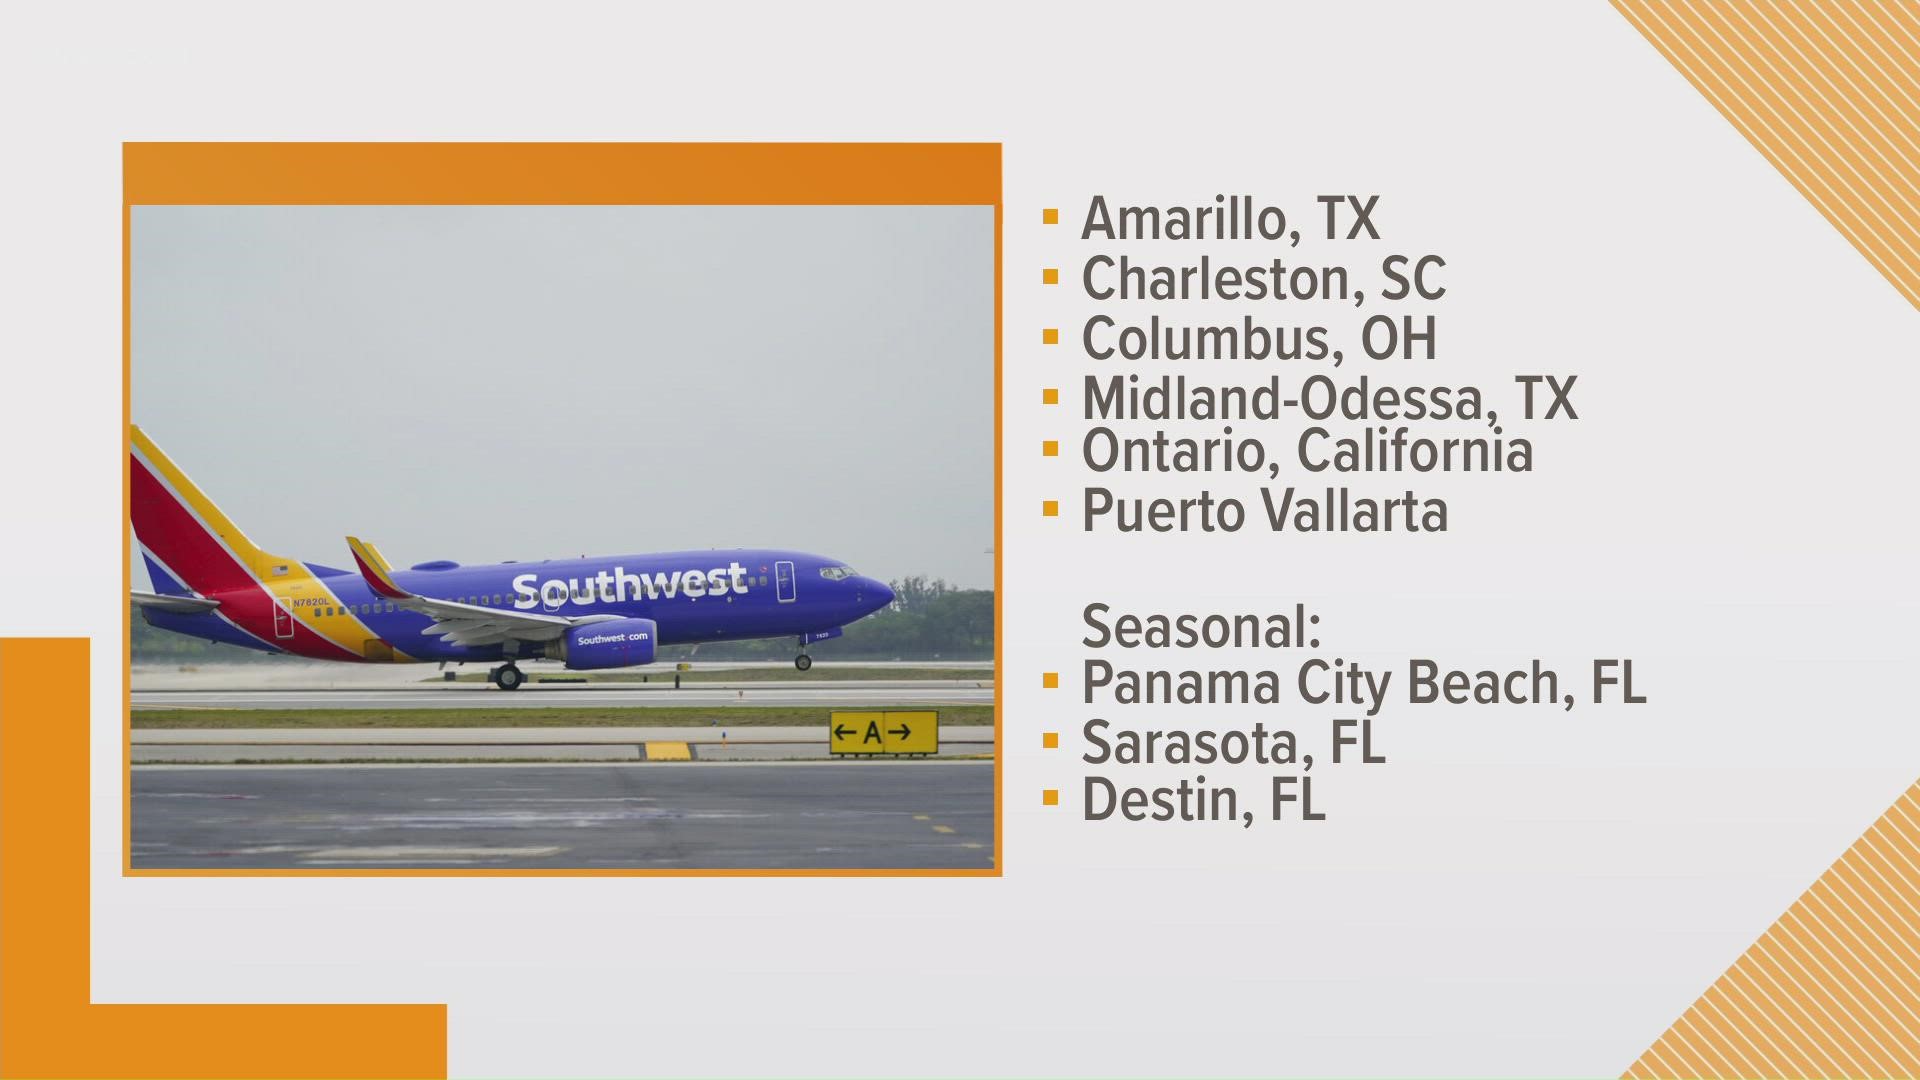 Southwest is adding nine new nonstop routes from Austin, including daily nonstop service to Amarillo, Charleston, Columbus, Midland-Odessa and Ontario, California.